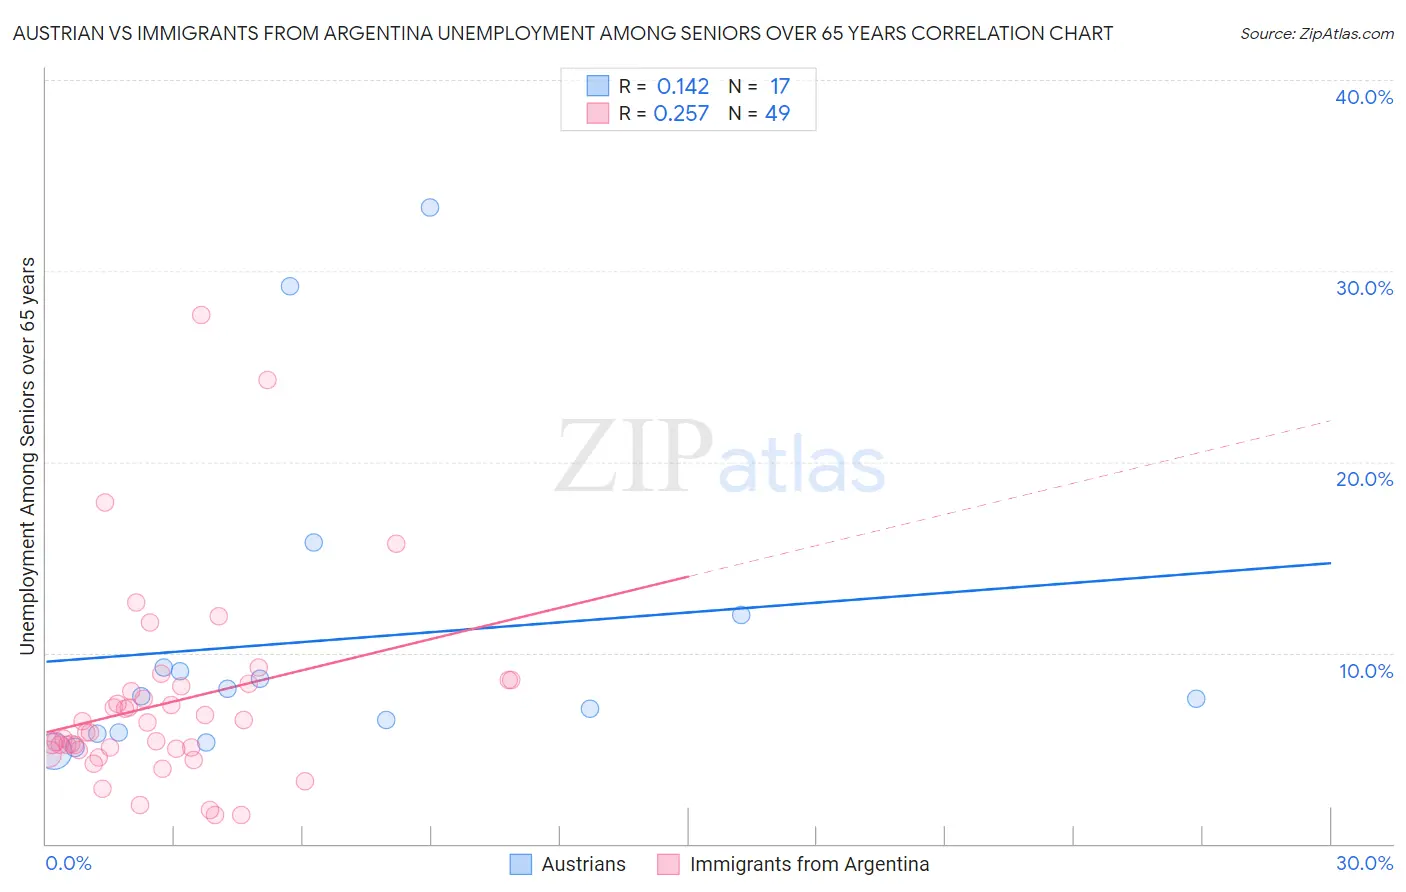 Austrian vs Immigrants from Argentina Unemployment Among Seniors over 65 years